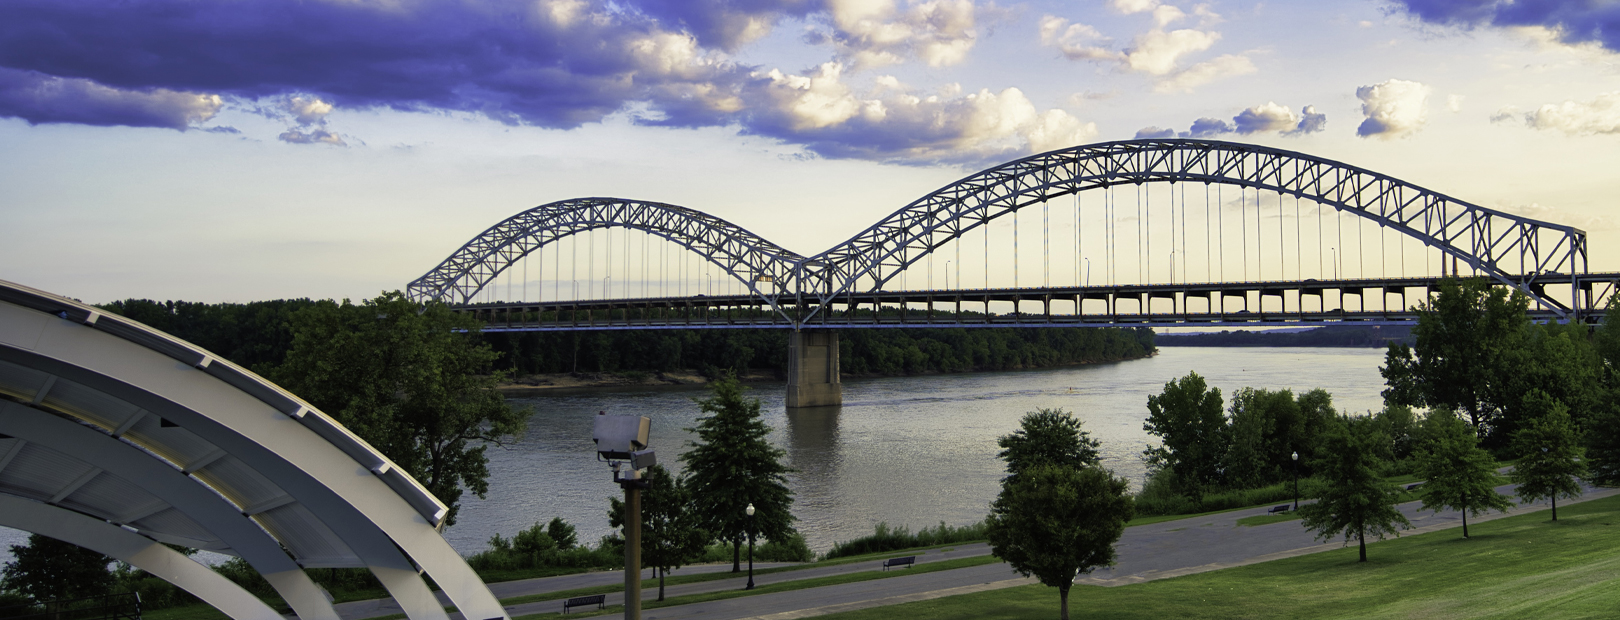 Image of Sherman Minton Bridge from New Albany, IN